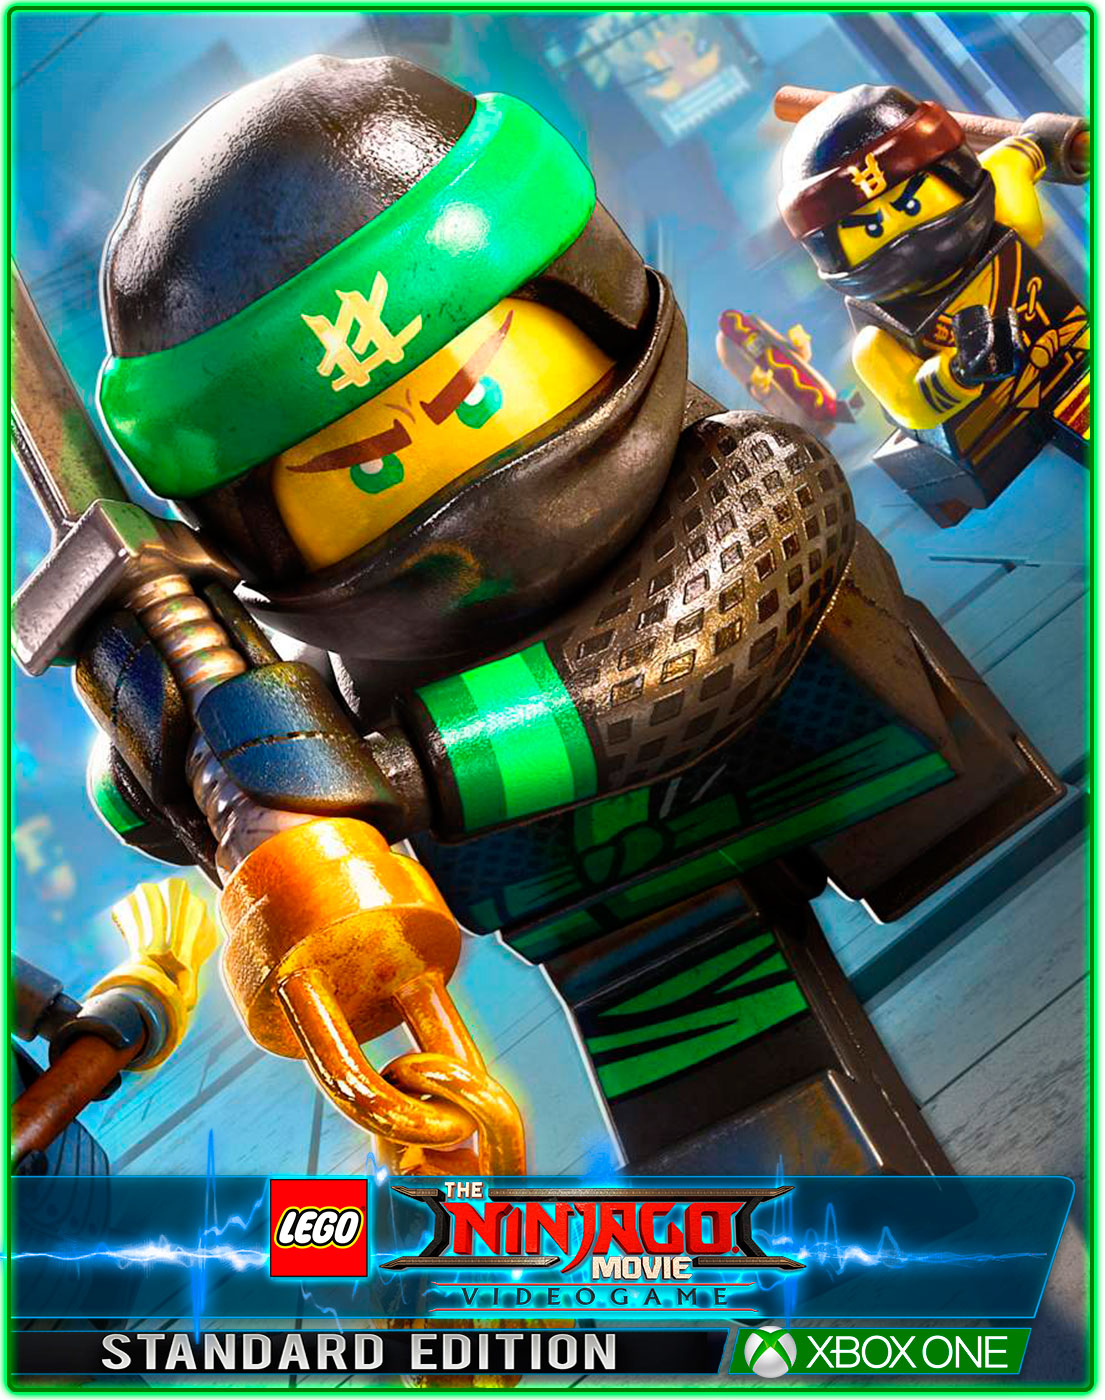 Buy LEGO Ninjago Movie Video Game(XBOX ONE) and download